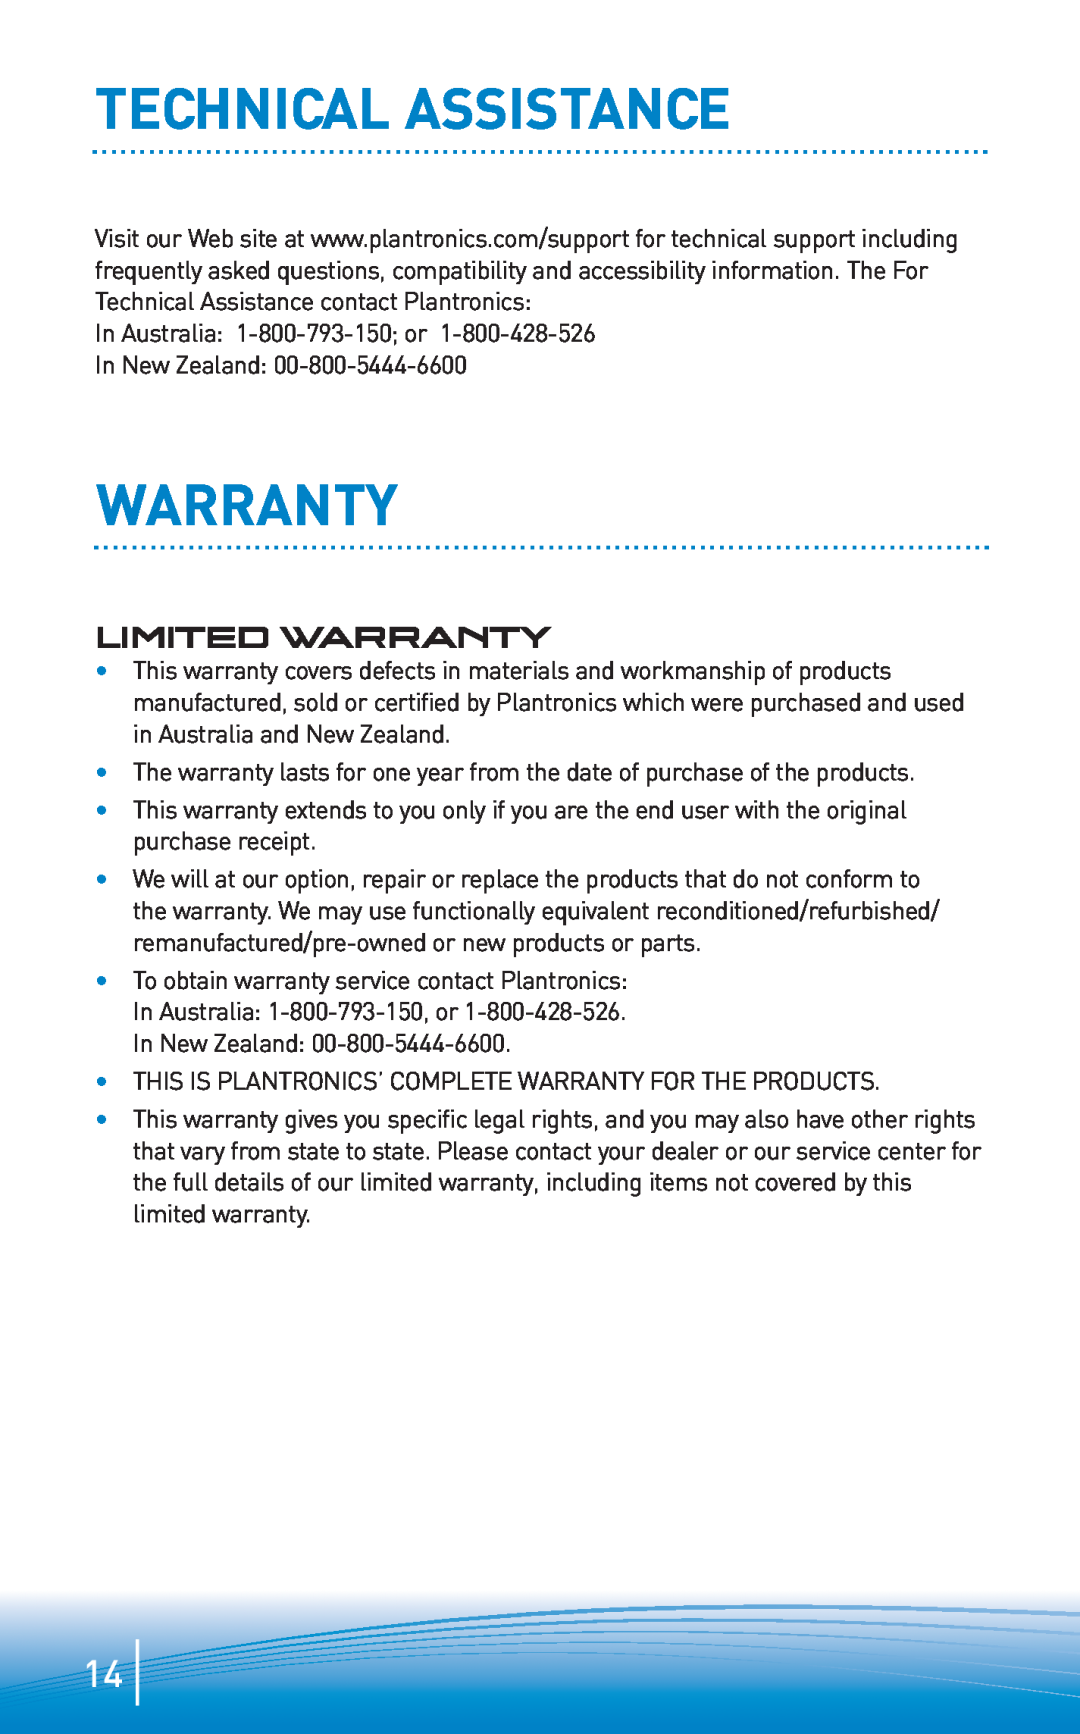 Plantronics 665 manual Technical Assistance, Limited Warranty 